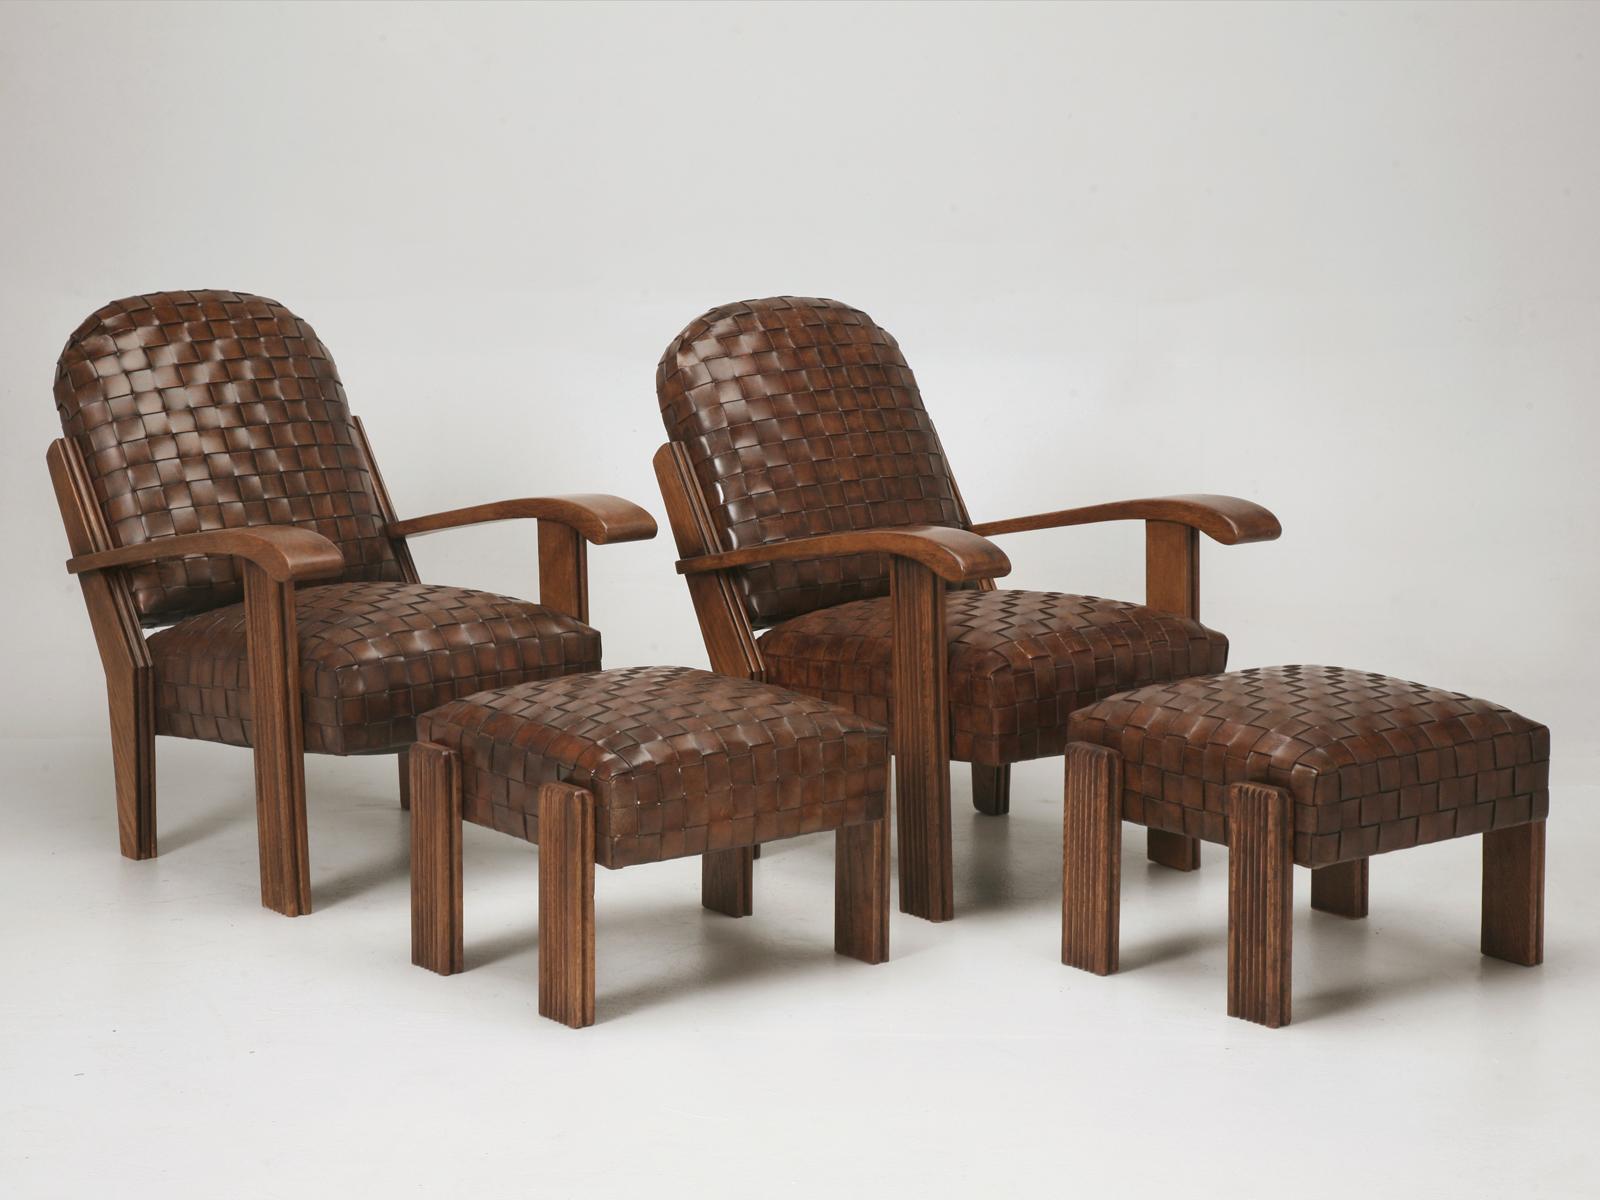 Made in our Old Plank Workshop, are an exact copy of an Original Pair of circa 1910-1920 Club Chairs we purchased in France over 20 years ago. The only real difference is that we made them more comfortable by using a proper horsehair padding, and